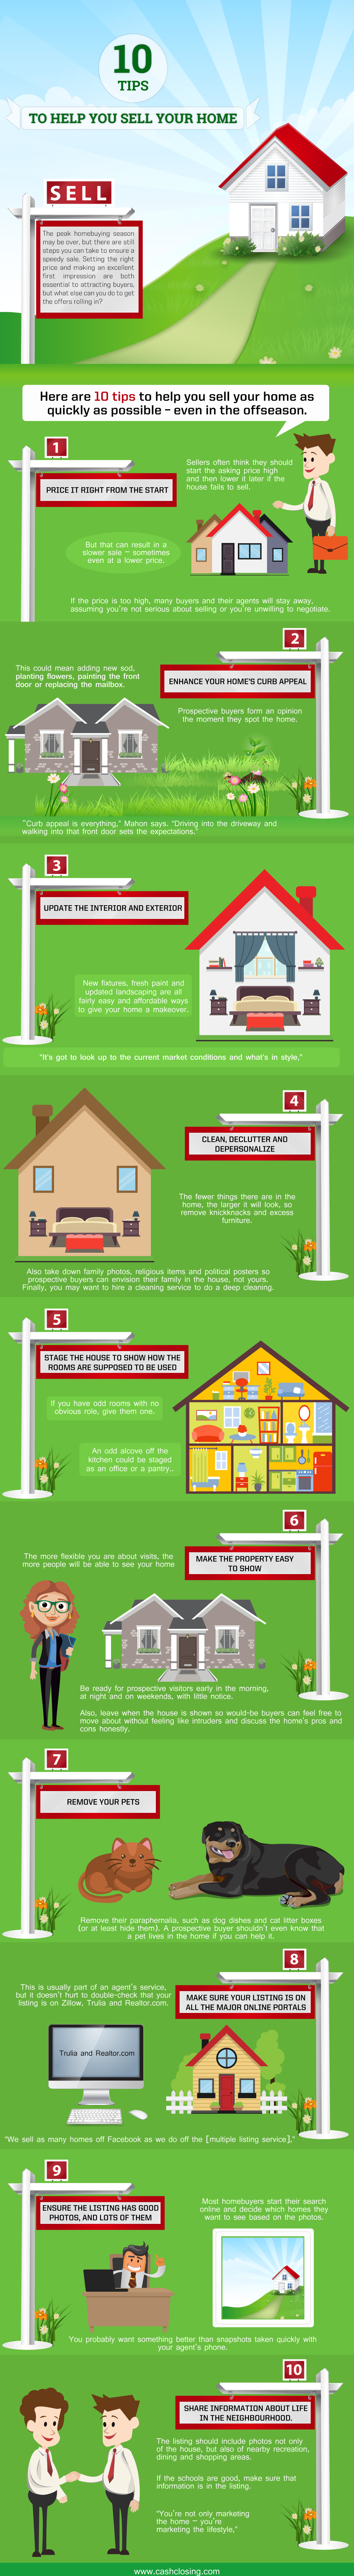 Top 10 Tips To Help You Sell Your Home Fast